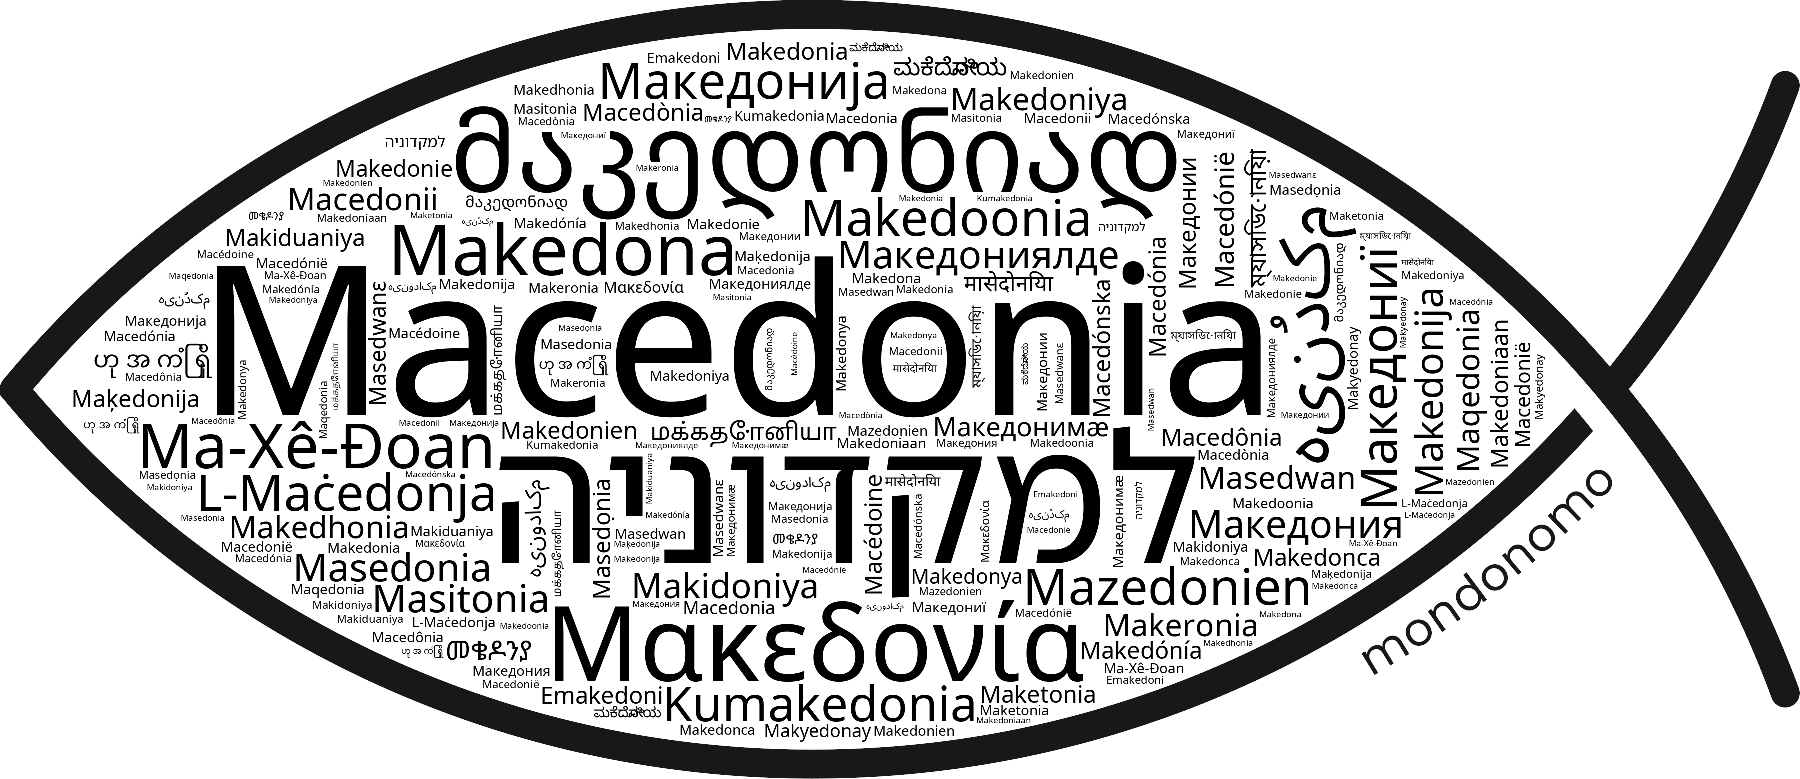 Name Macedonia in the world's Bibles